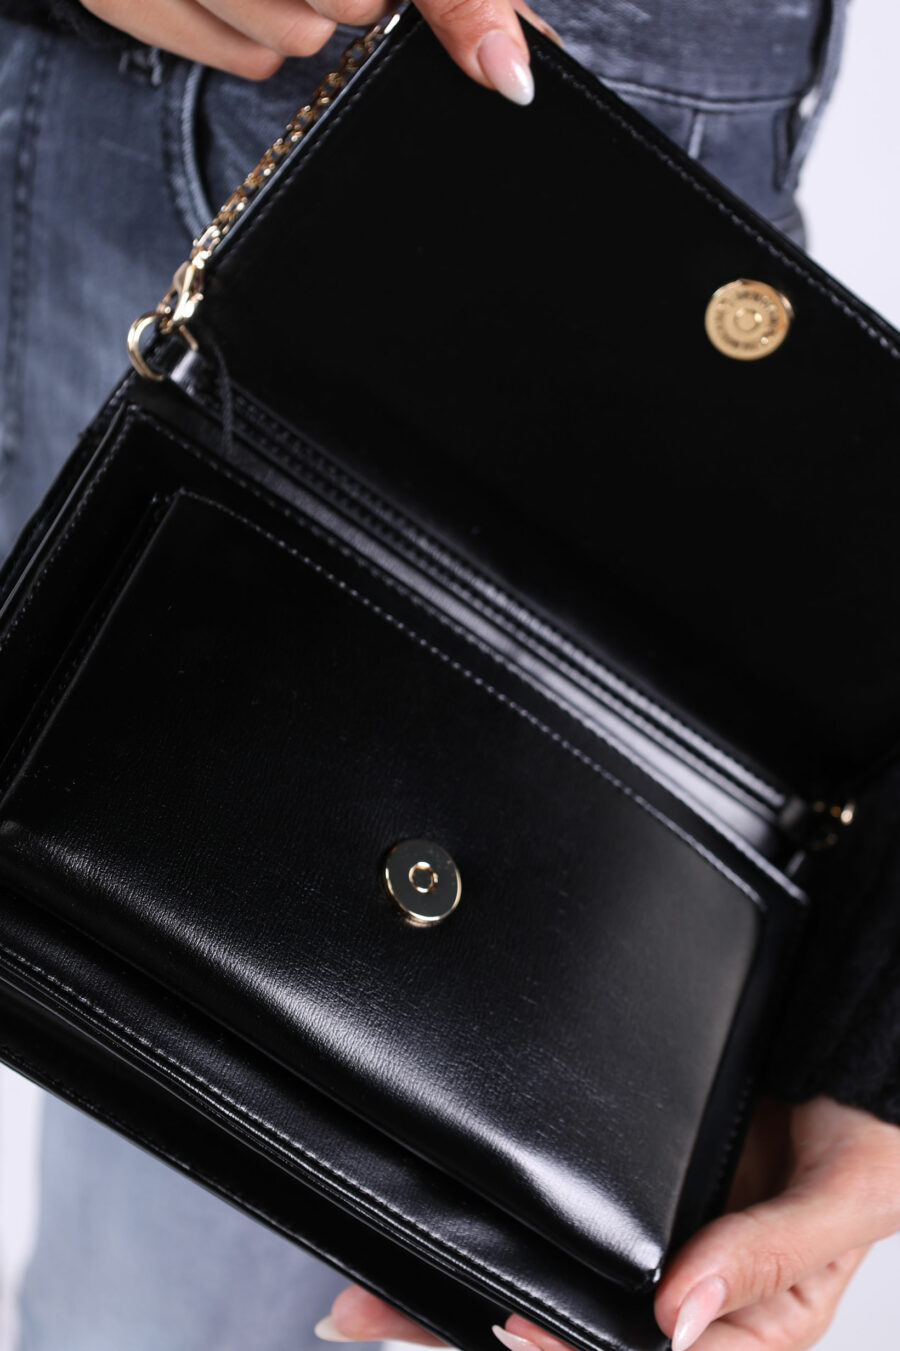 Black shoulder bag with gold lettering mini logo and chain - 361223054662201979